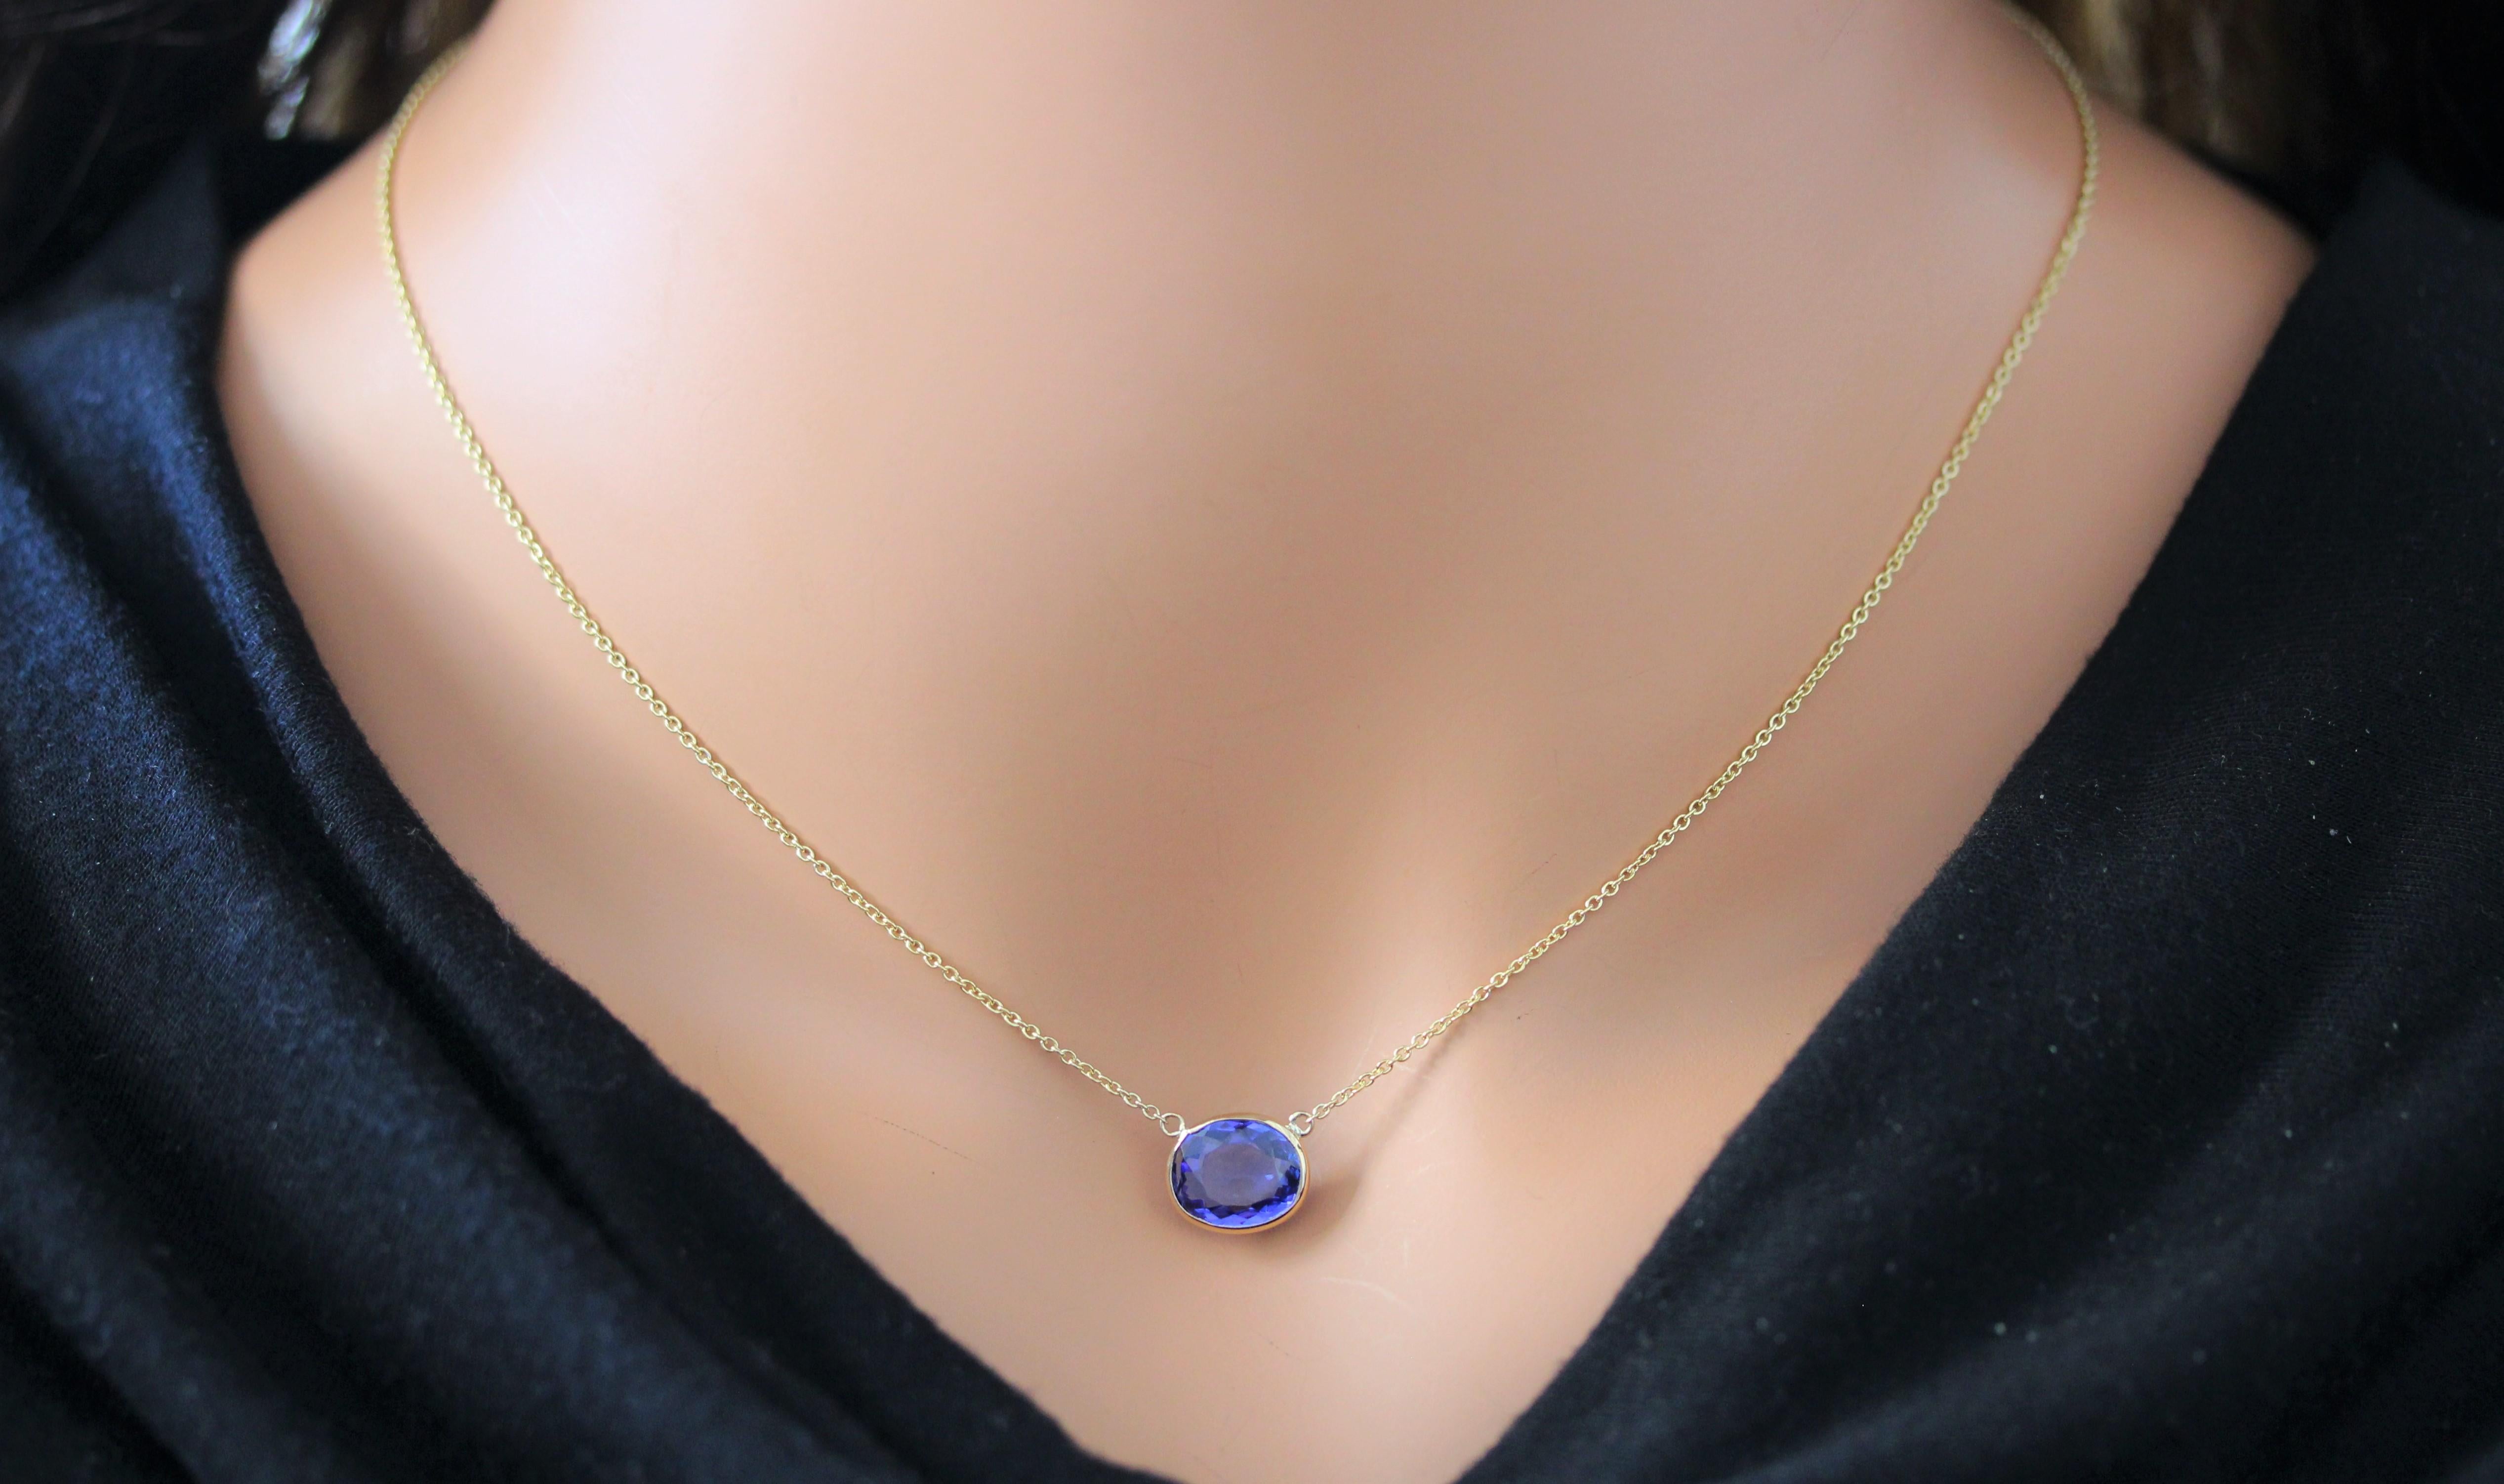 Contemporary 3.18 Carat Oval Tanzanite Blue Fashion Necklaces In 14k Yellow Gold For Sale